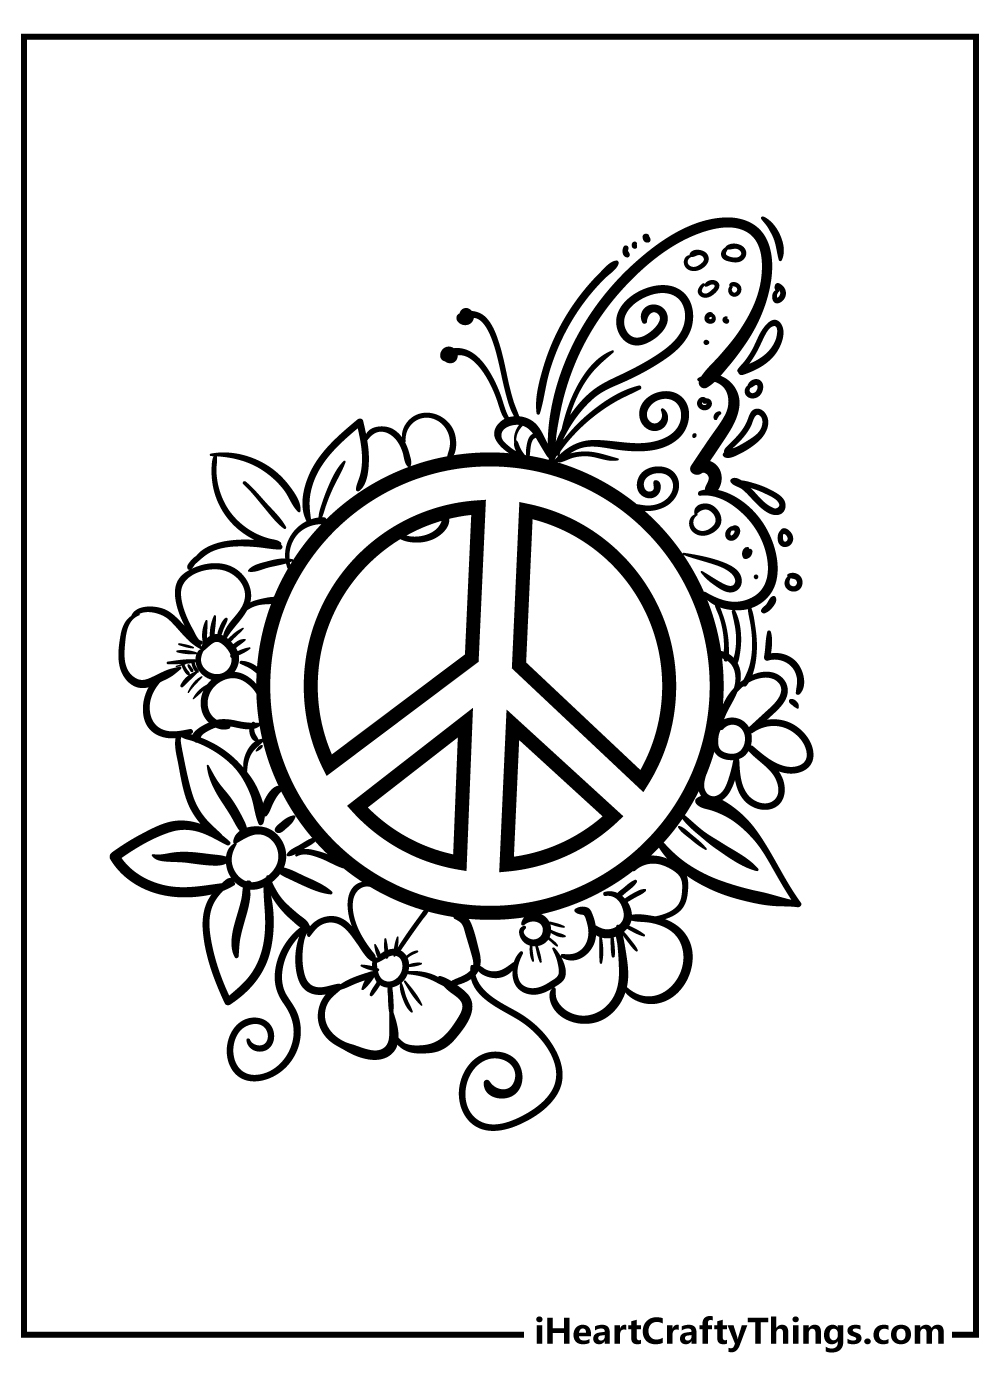 Peace Coloring Pages free pdf download